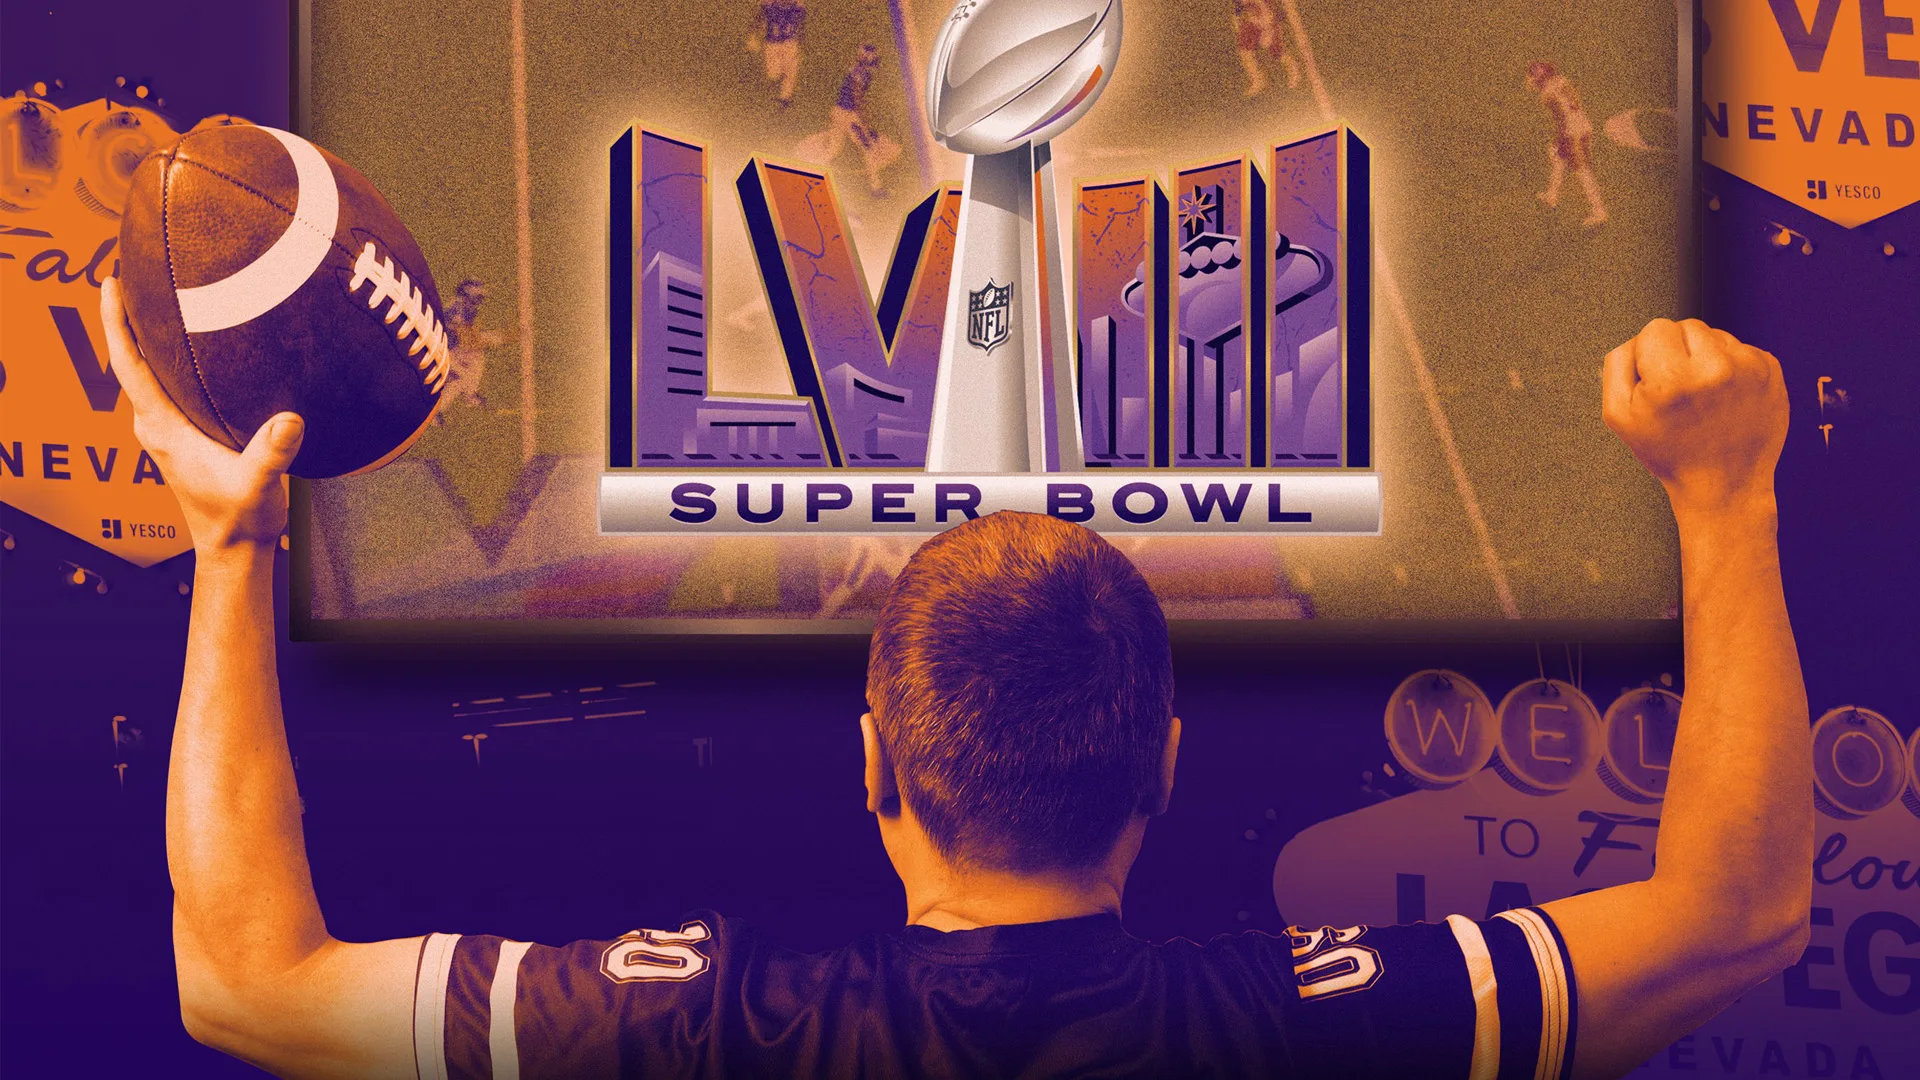 Superbowl Tailgate and Watchparty Web Banner